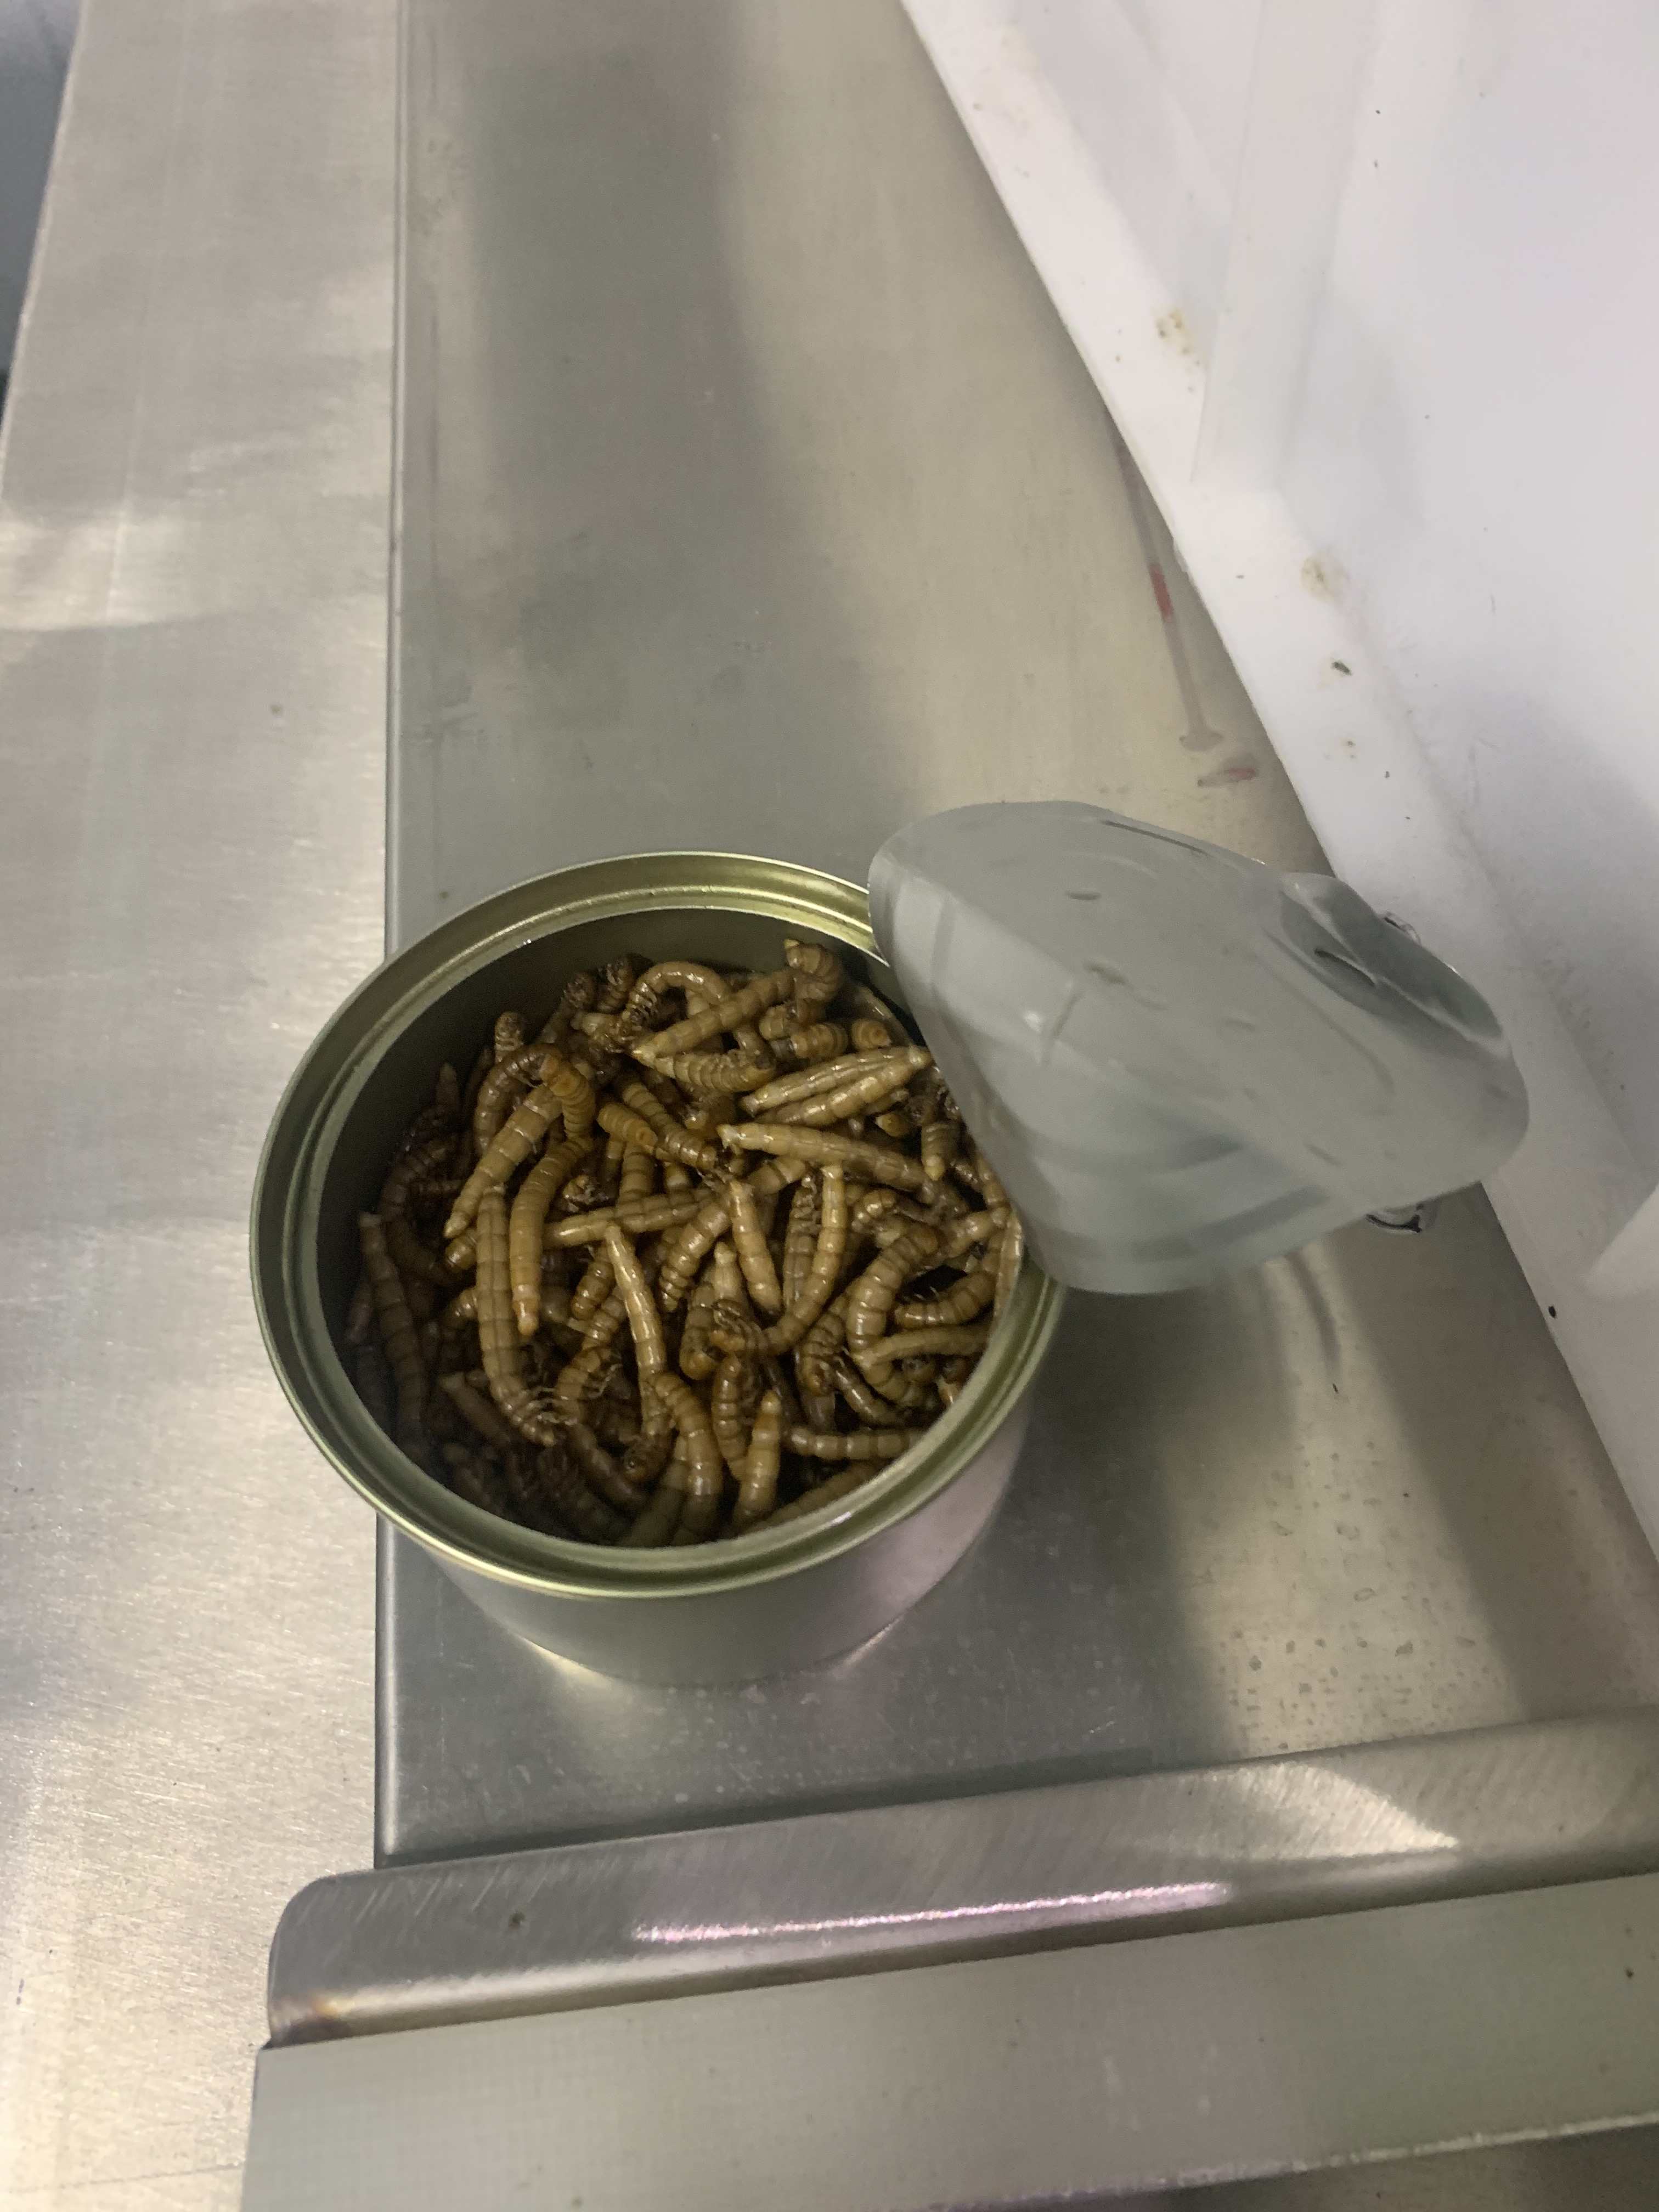 Canned fresh insects